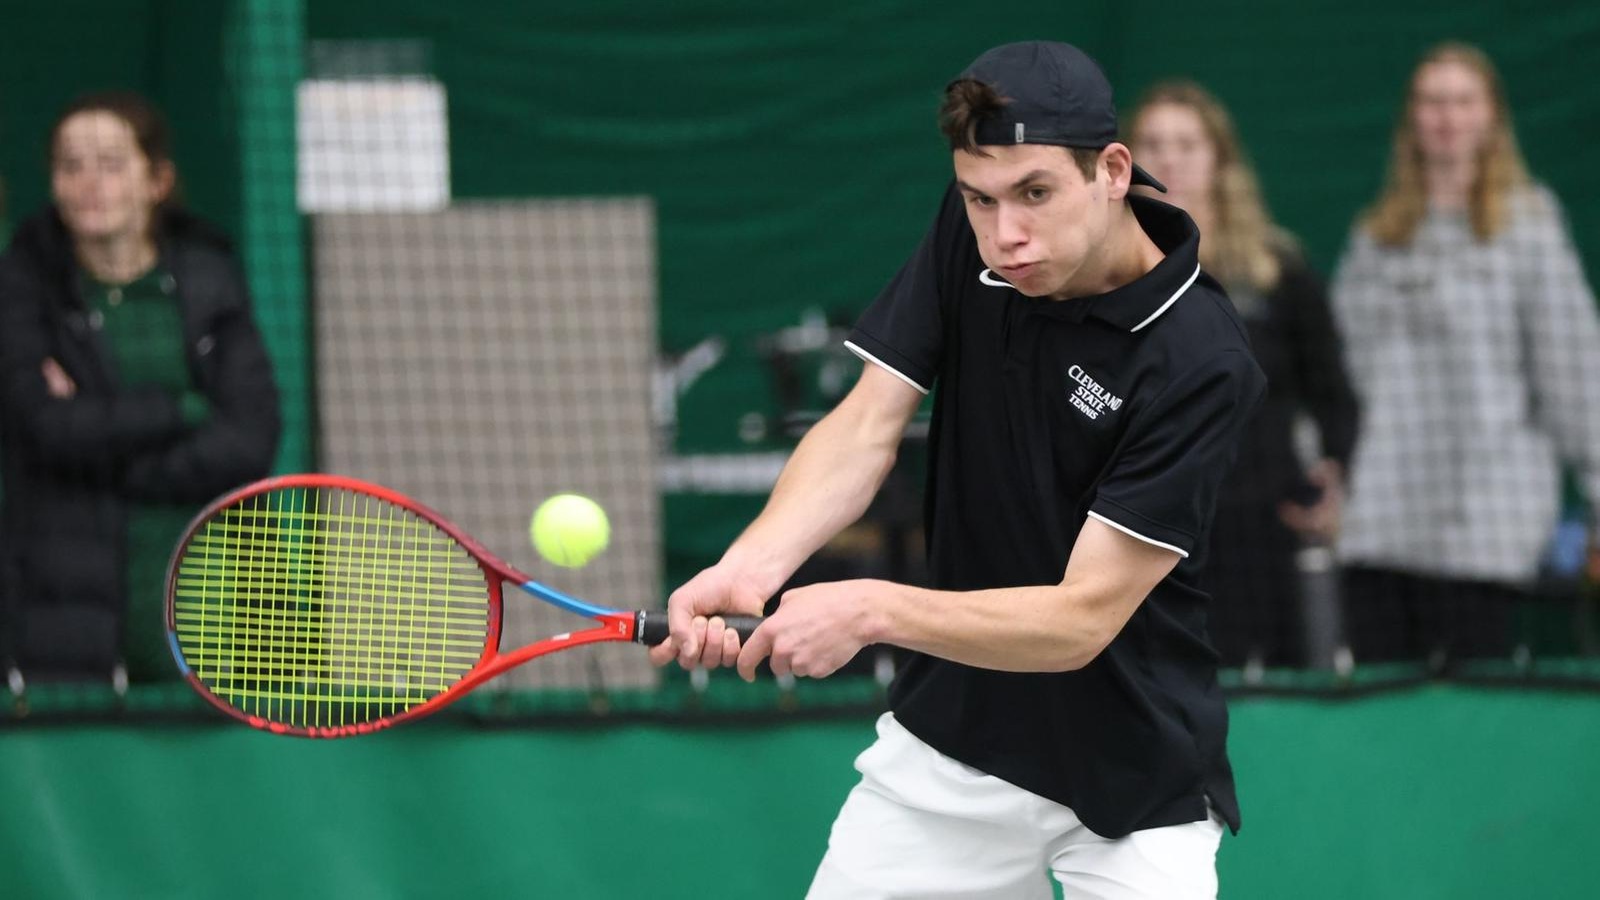 Cleveland State Men’s Tennis Picks Up Wins Over Chicago State & Baldwin Wallace